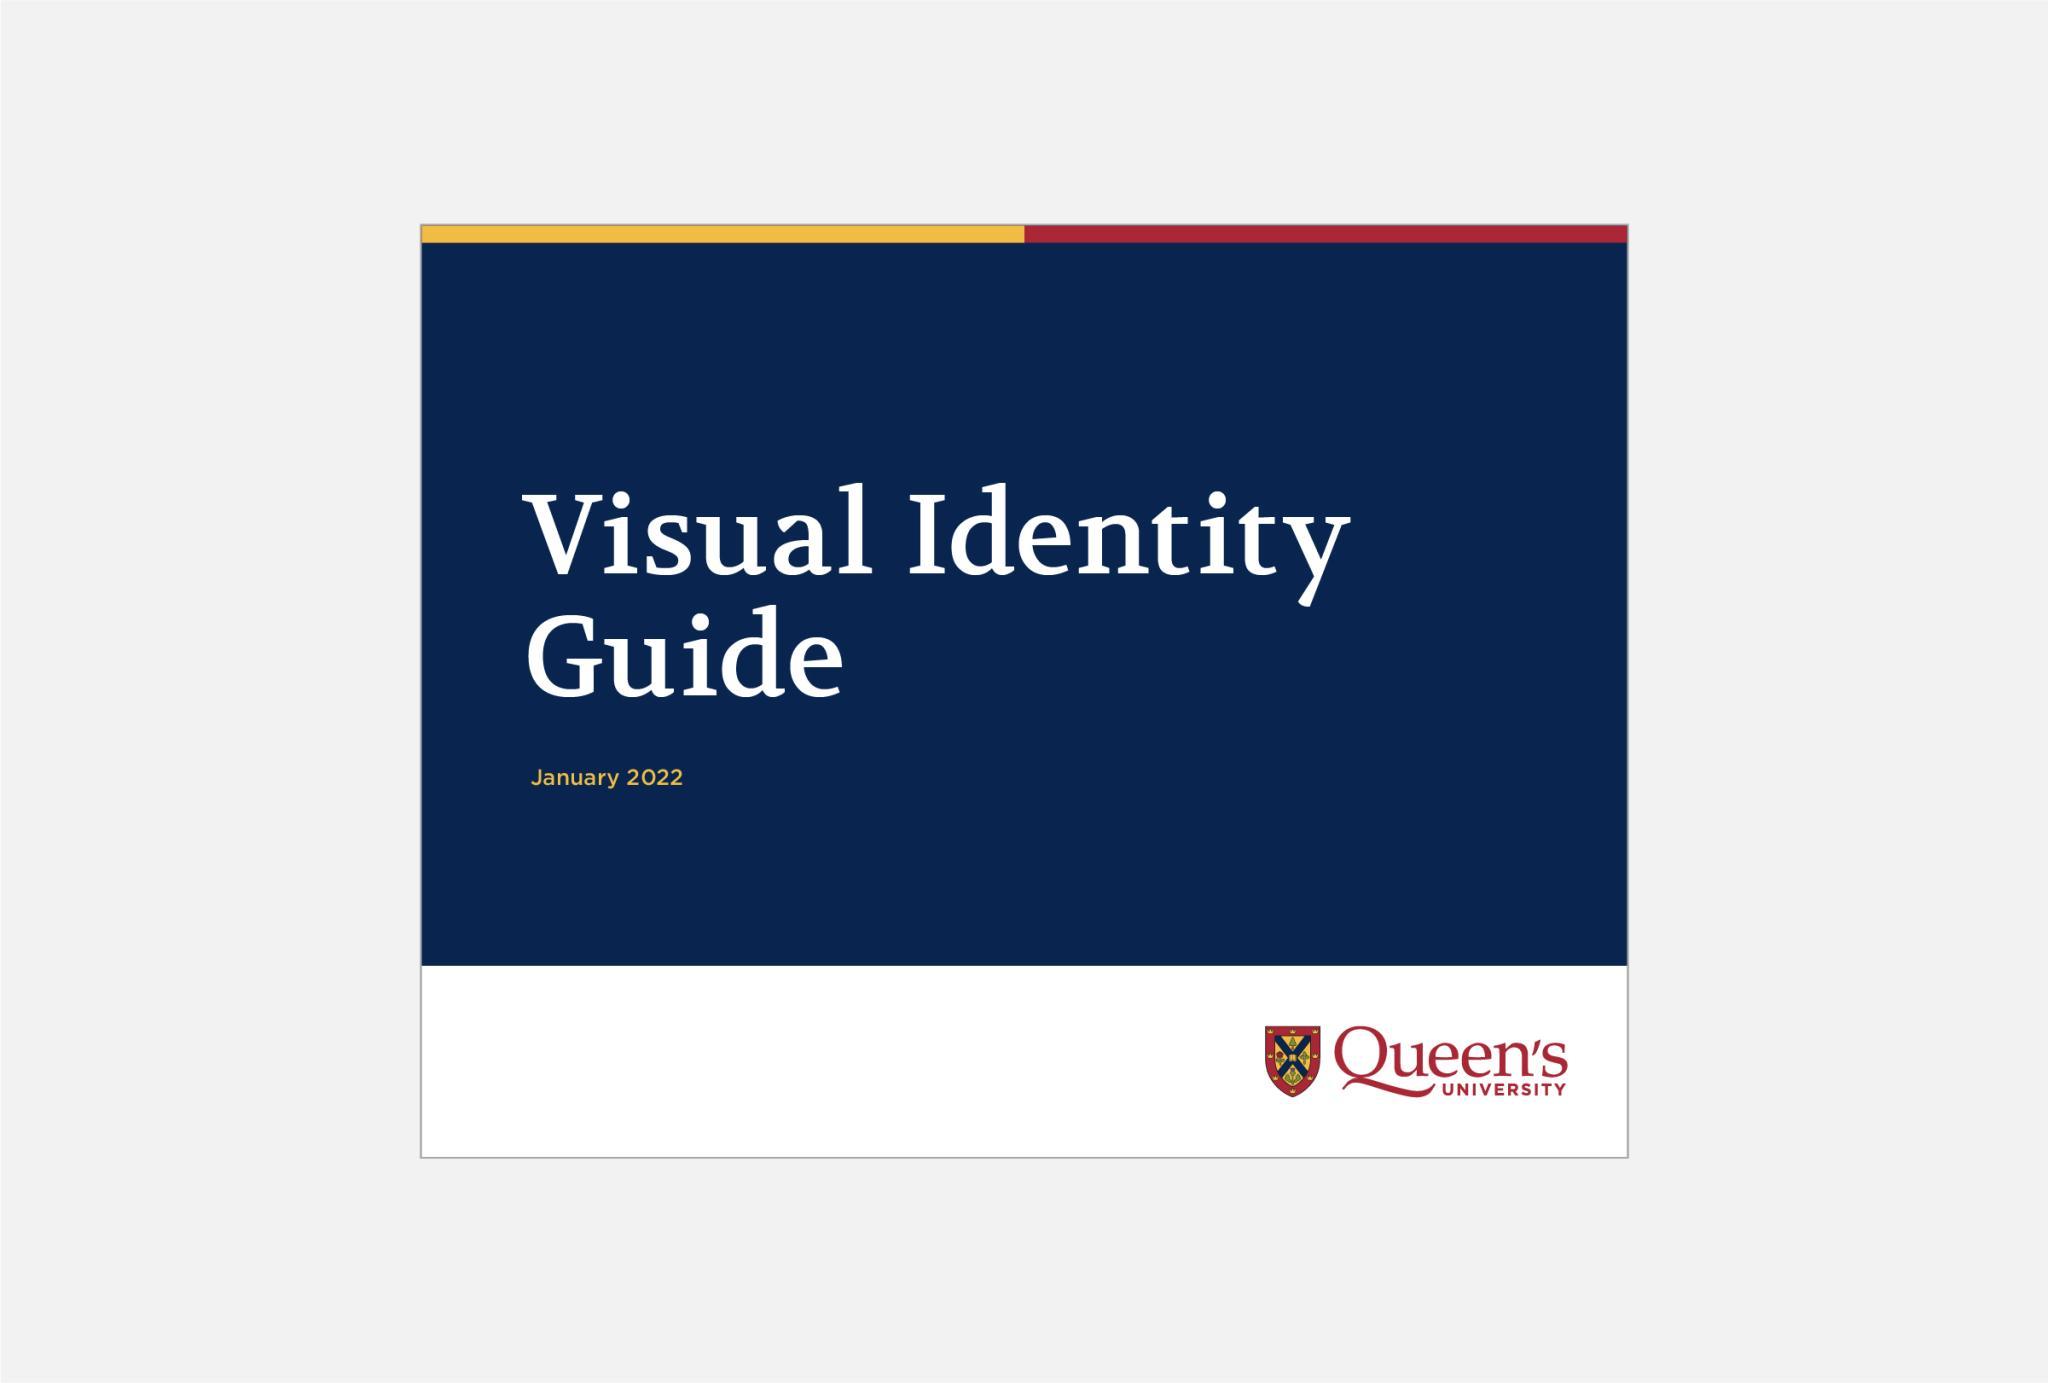 Queen's University visual identity guide